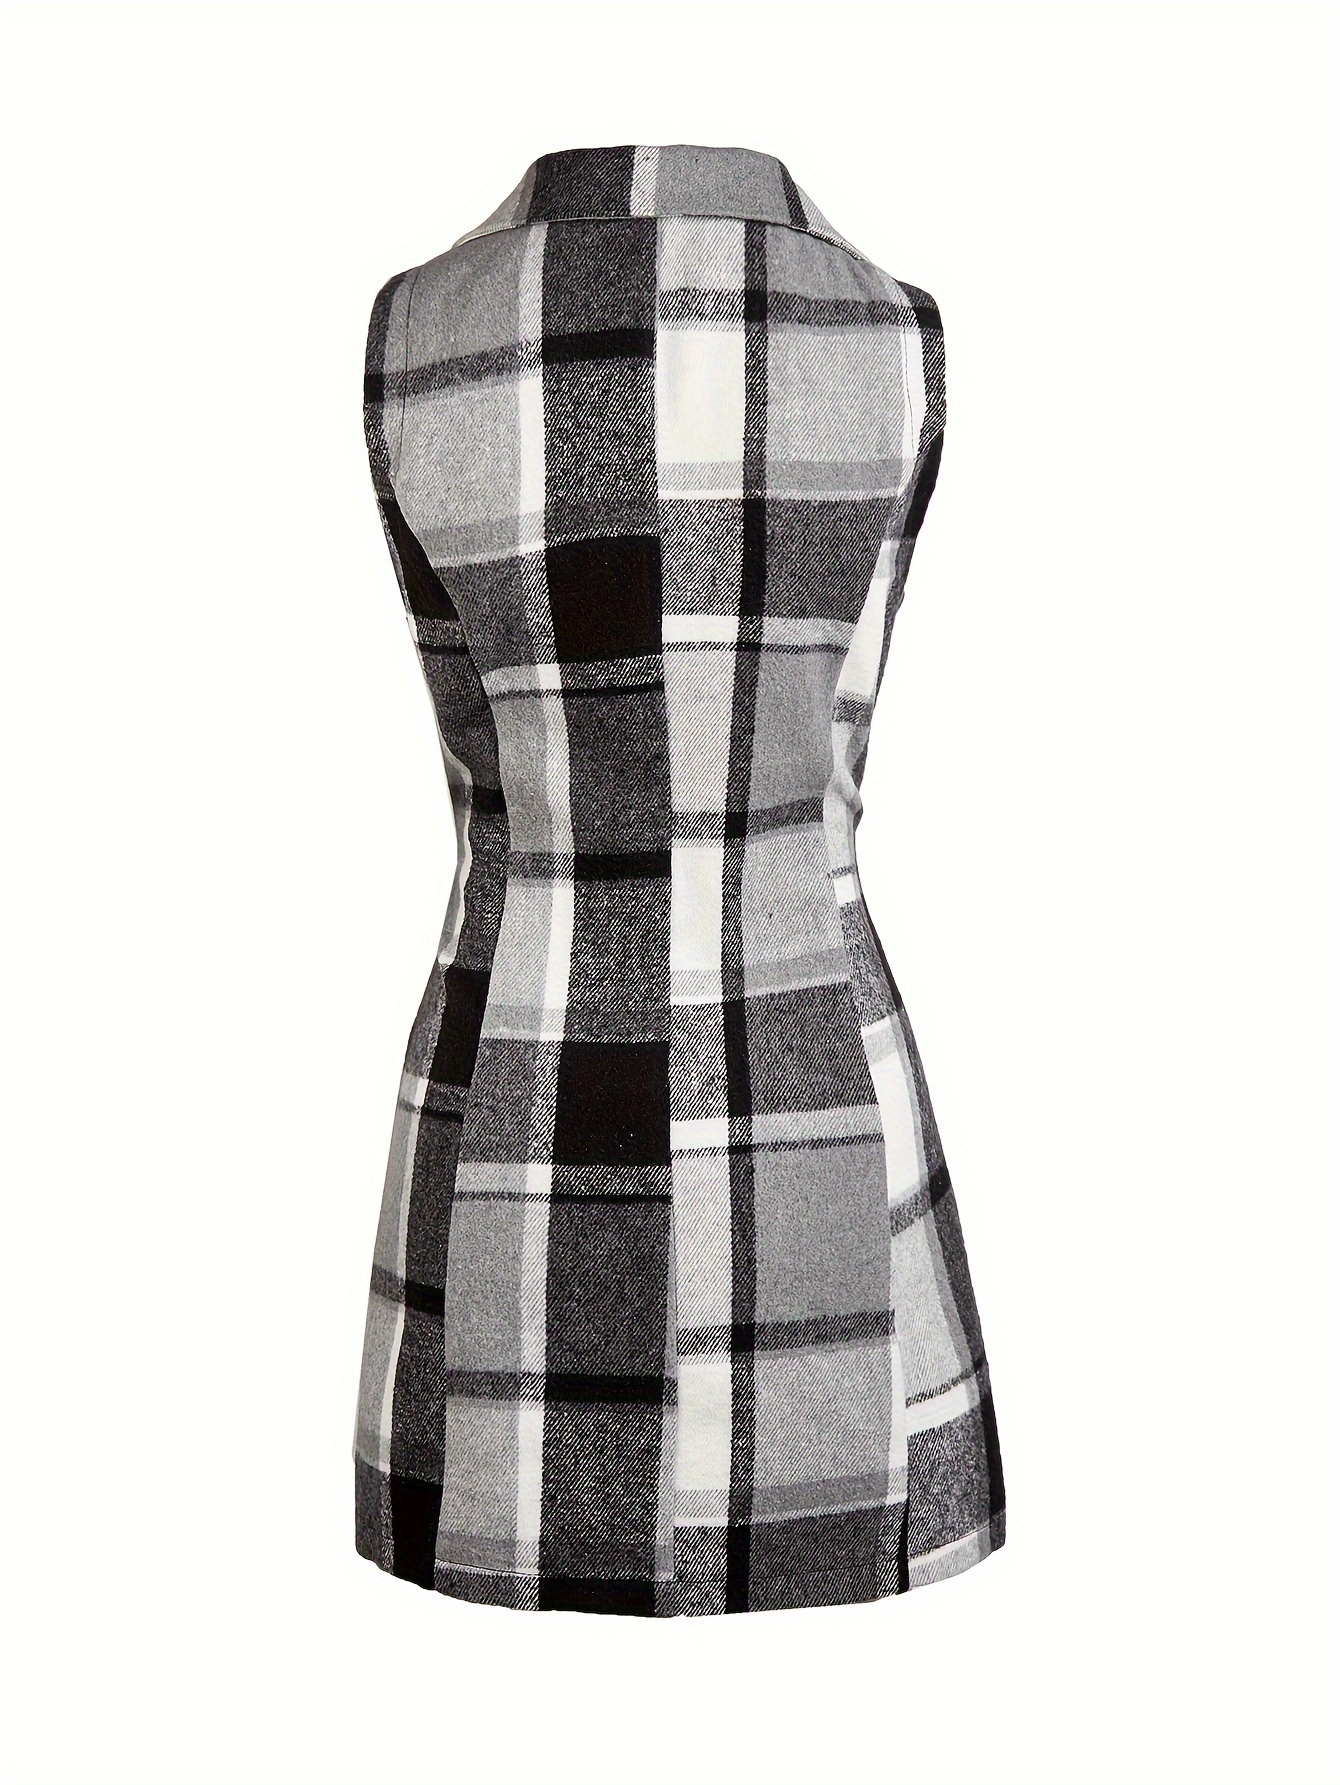 plaid sleeveless lapel blazer casual single breasted outerwear womens clothing details 6